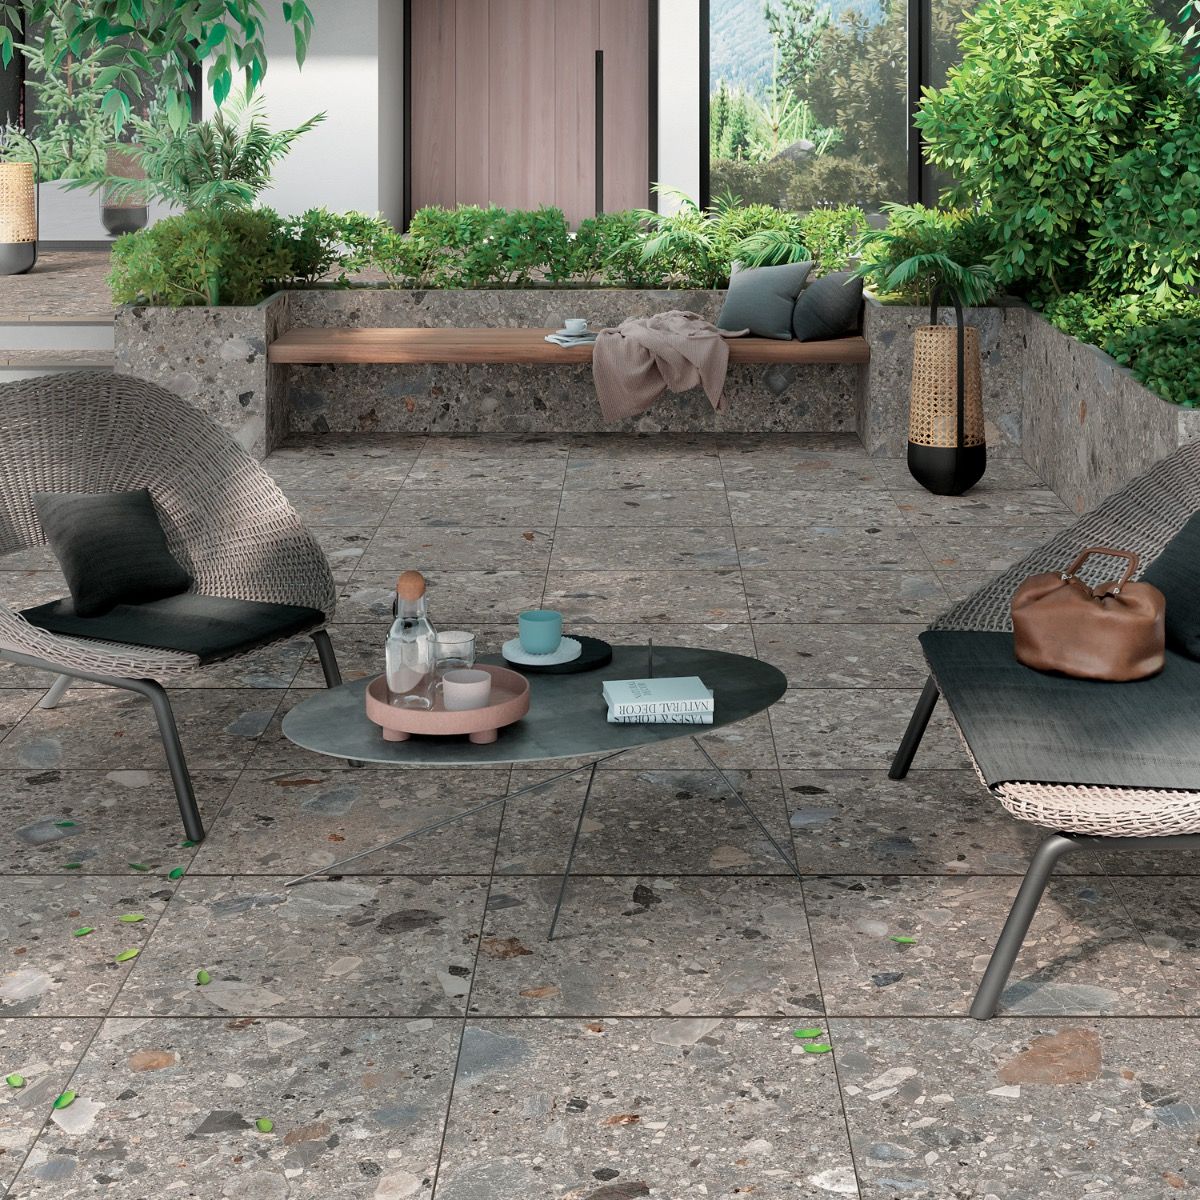 Rizo 2.0 Earth Matte 24x24 Porcelain Tile outside patio area used on the floor and wall up to knee height